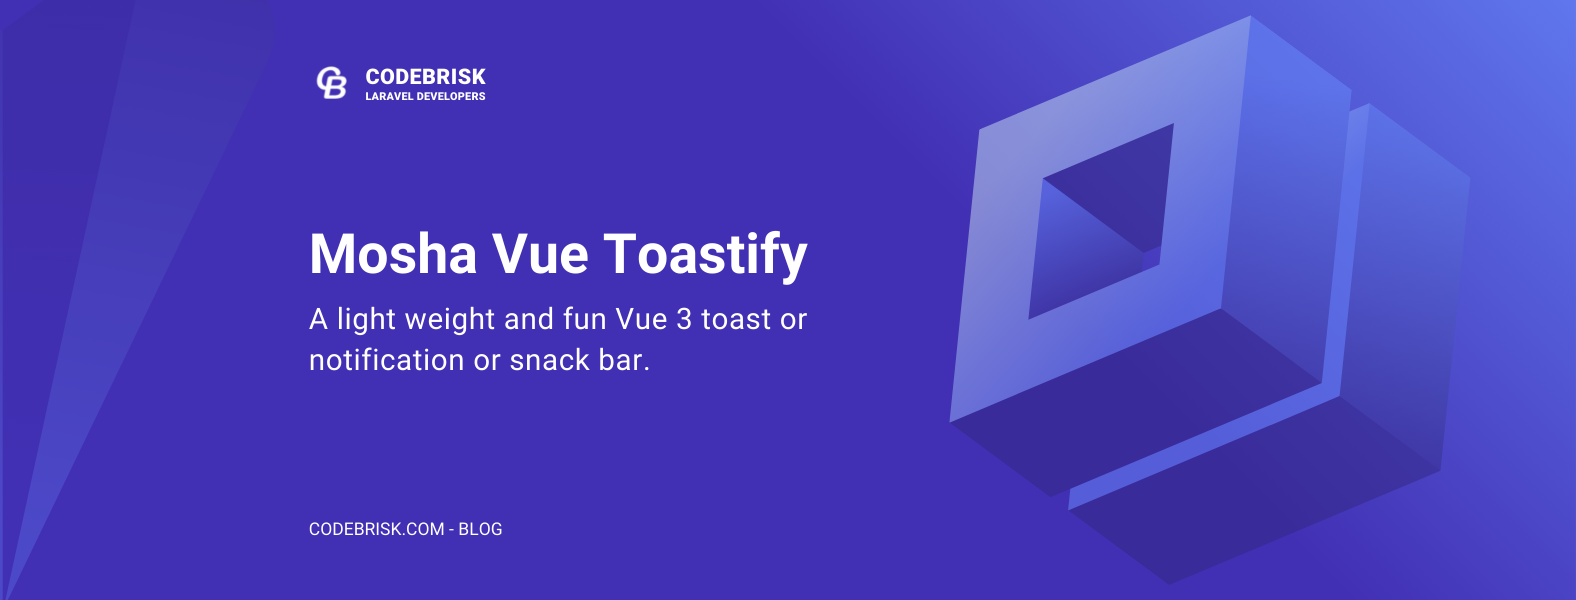 Mosha Vue Toastify - A Vue 3 toast or Notification Library cover image